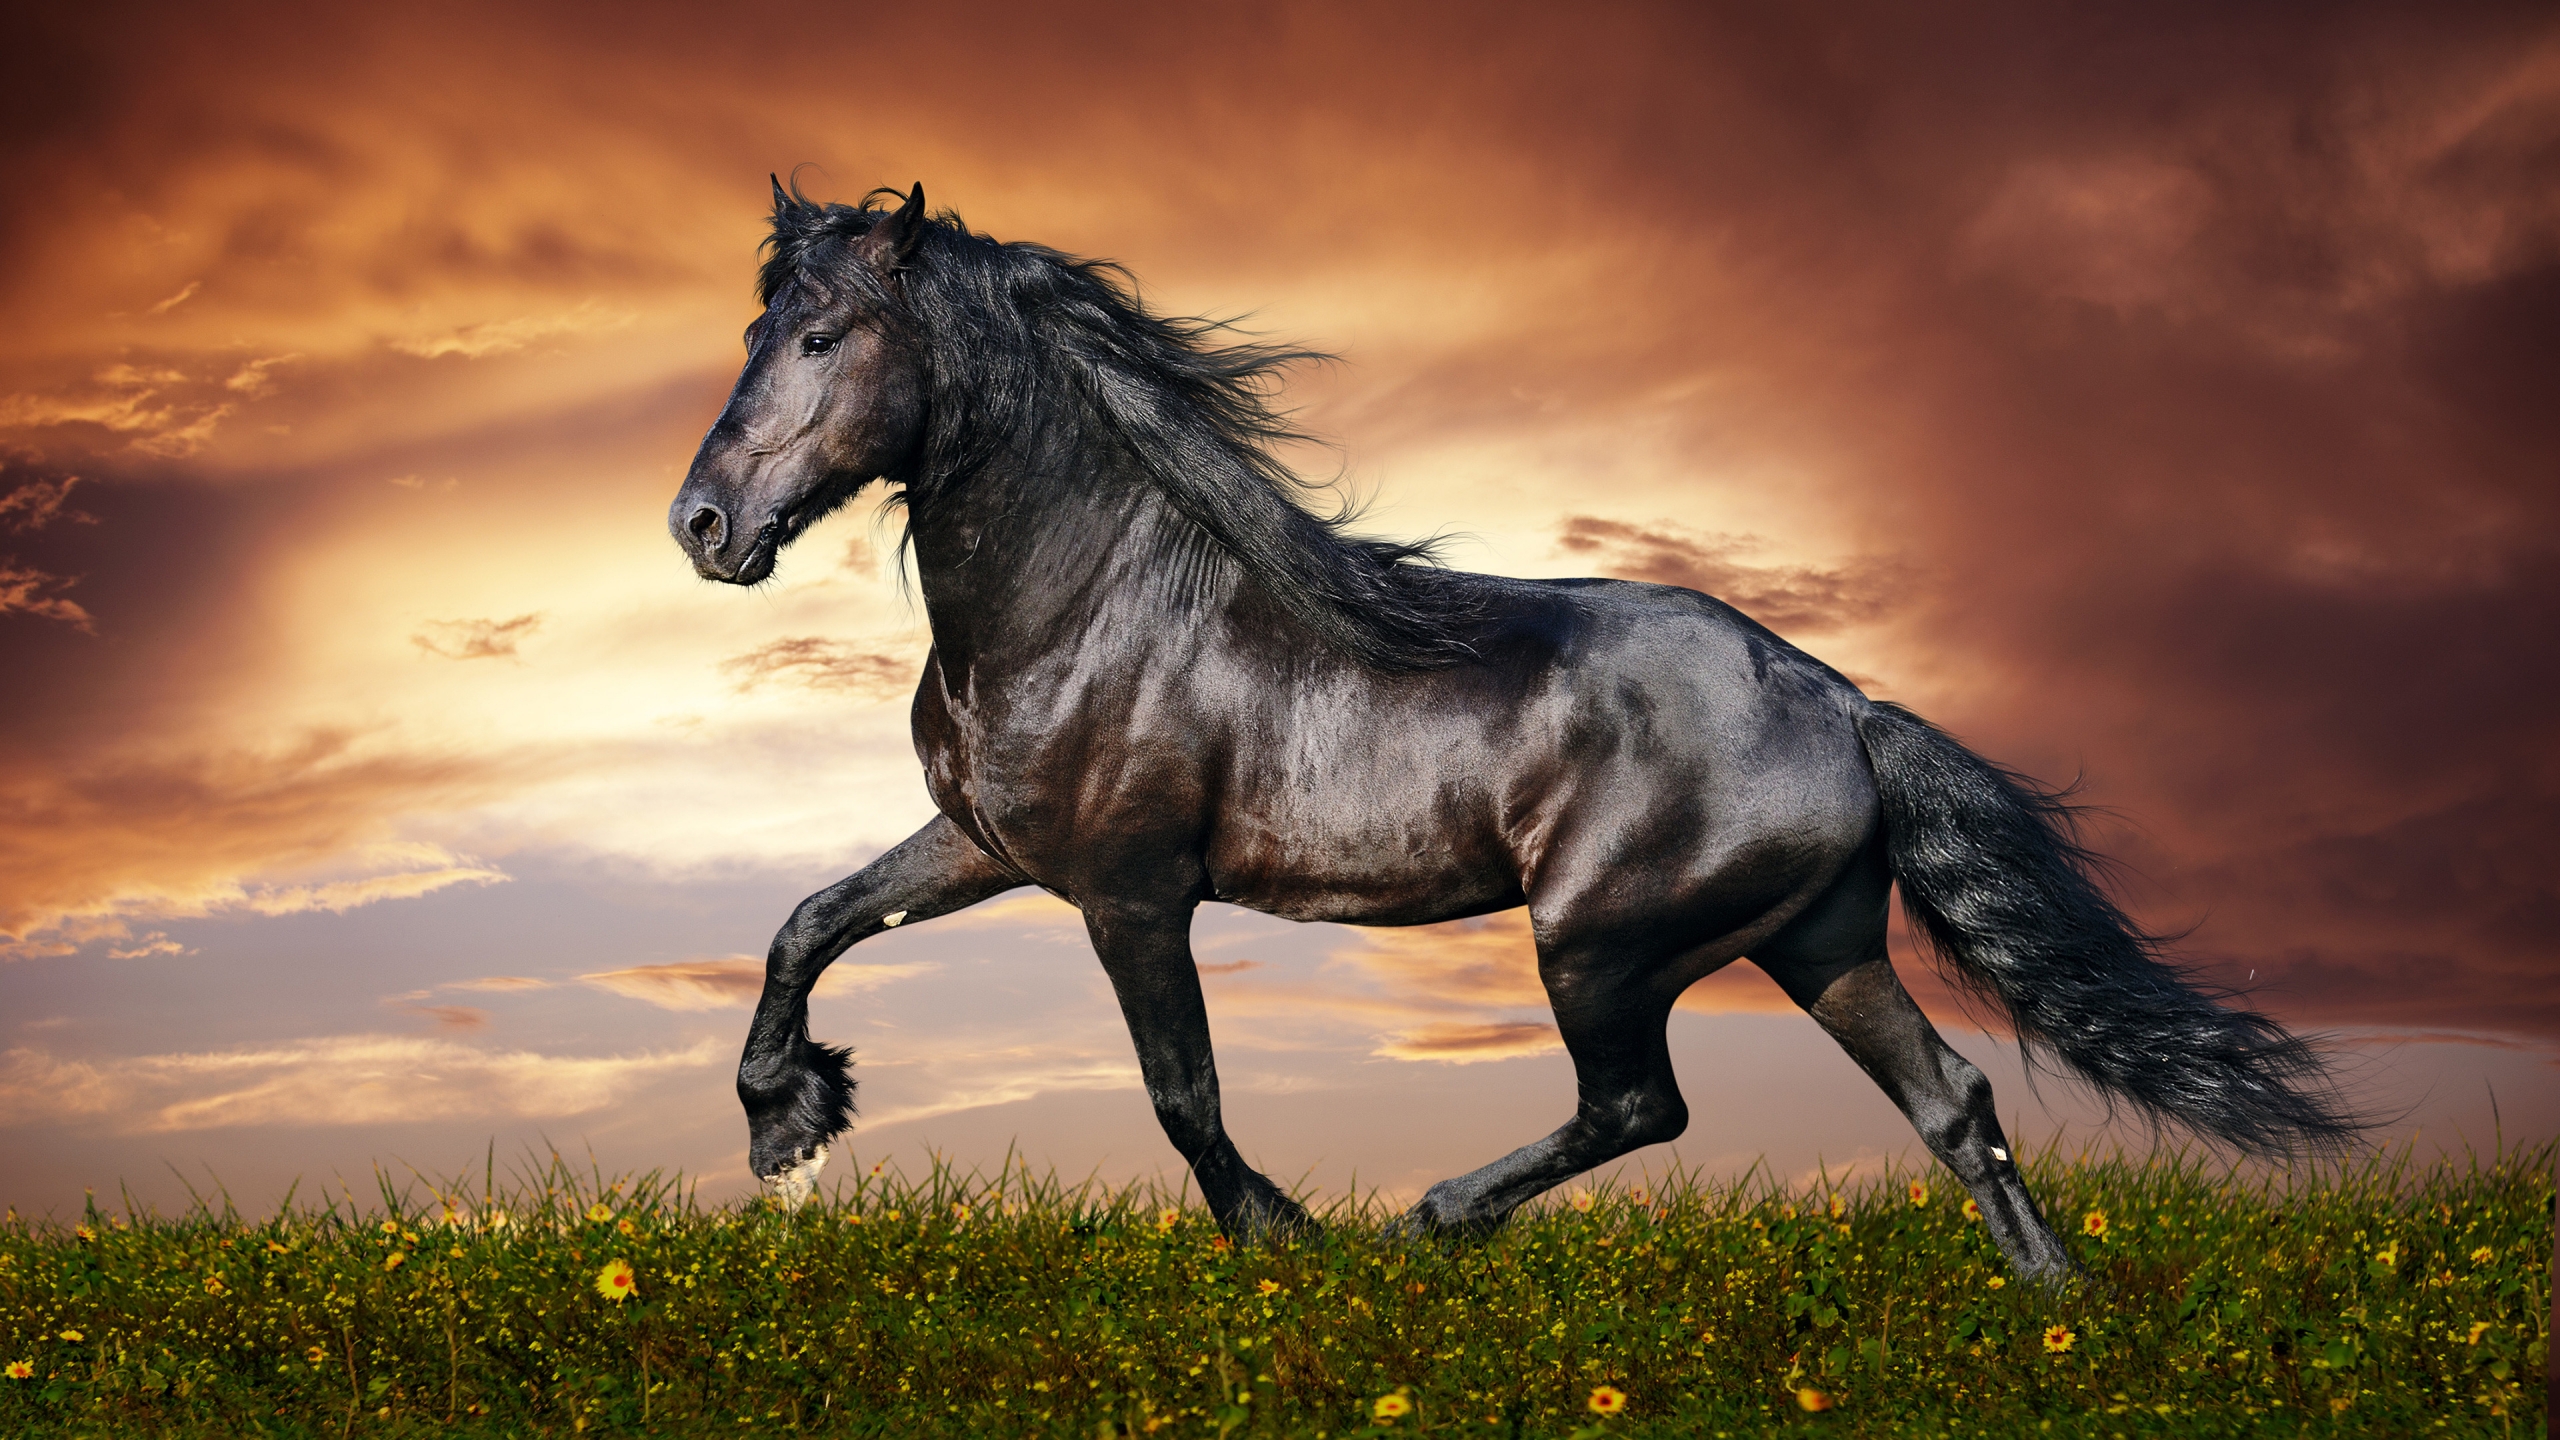 Beautiful Black Horse for 2560x1440 HDTV resolution